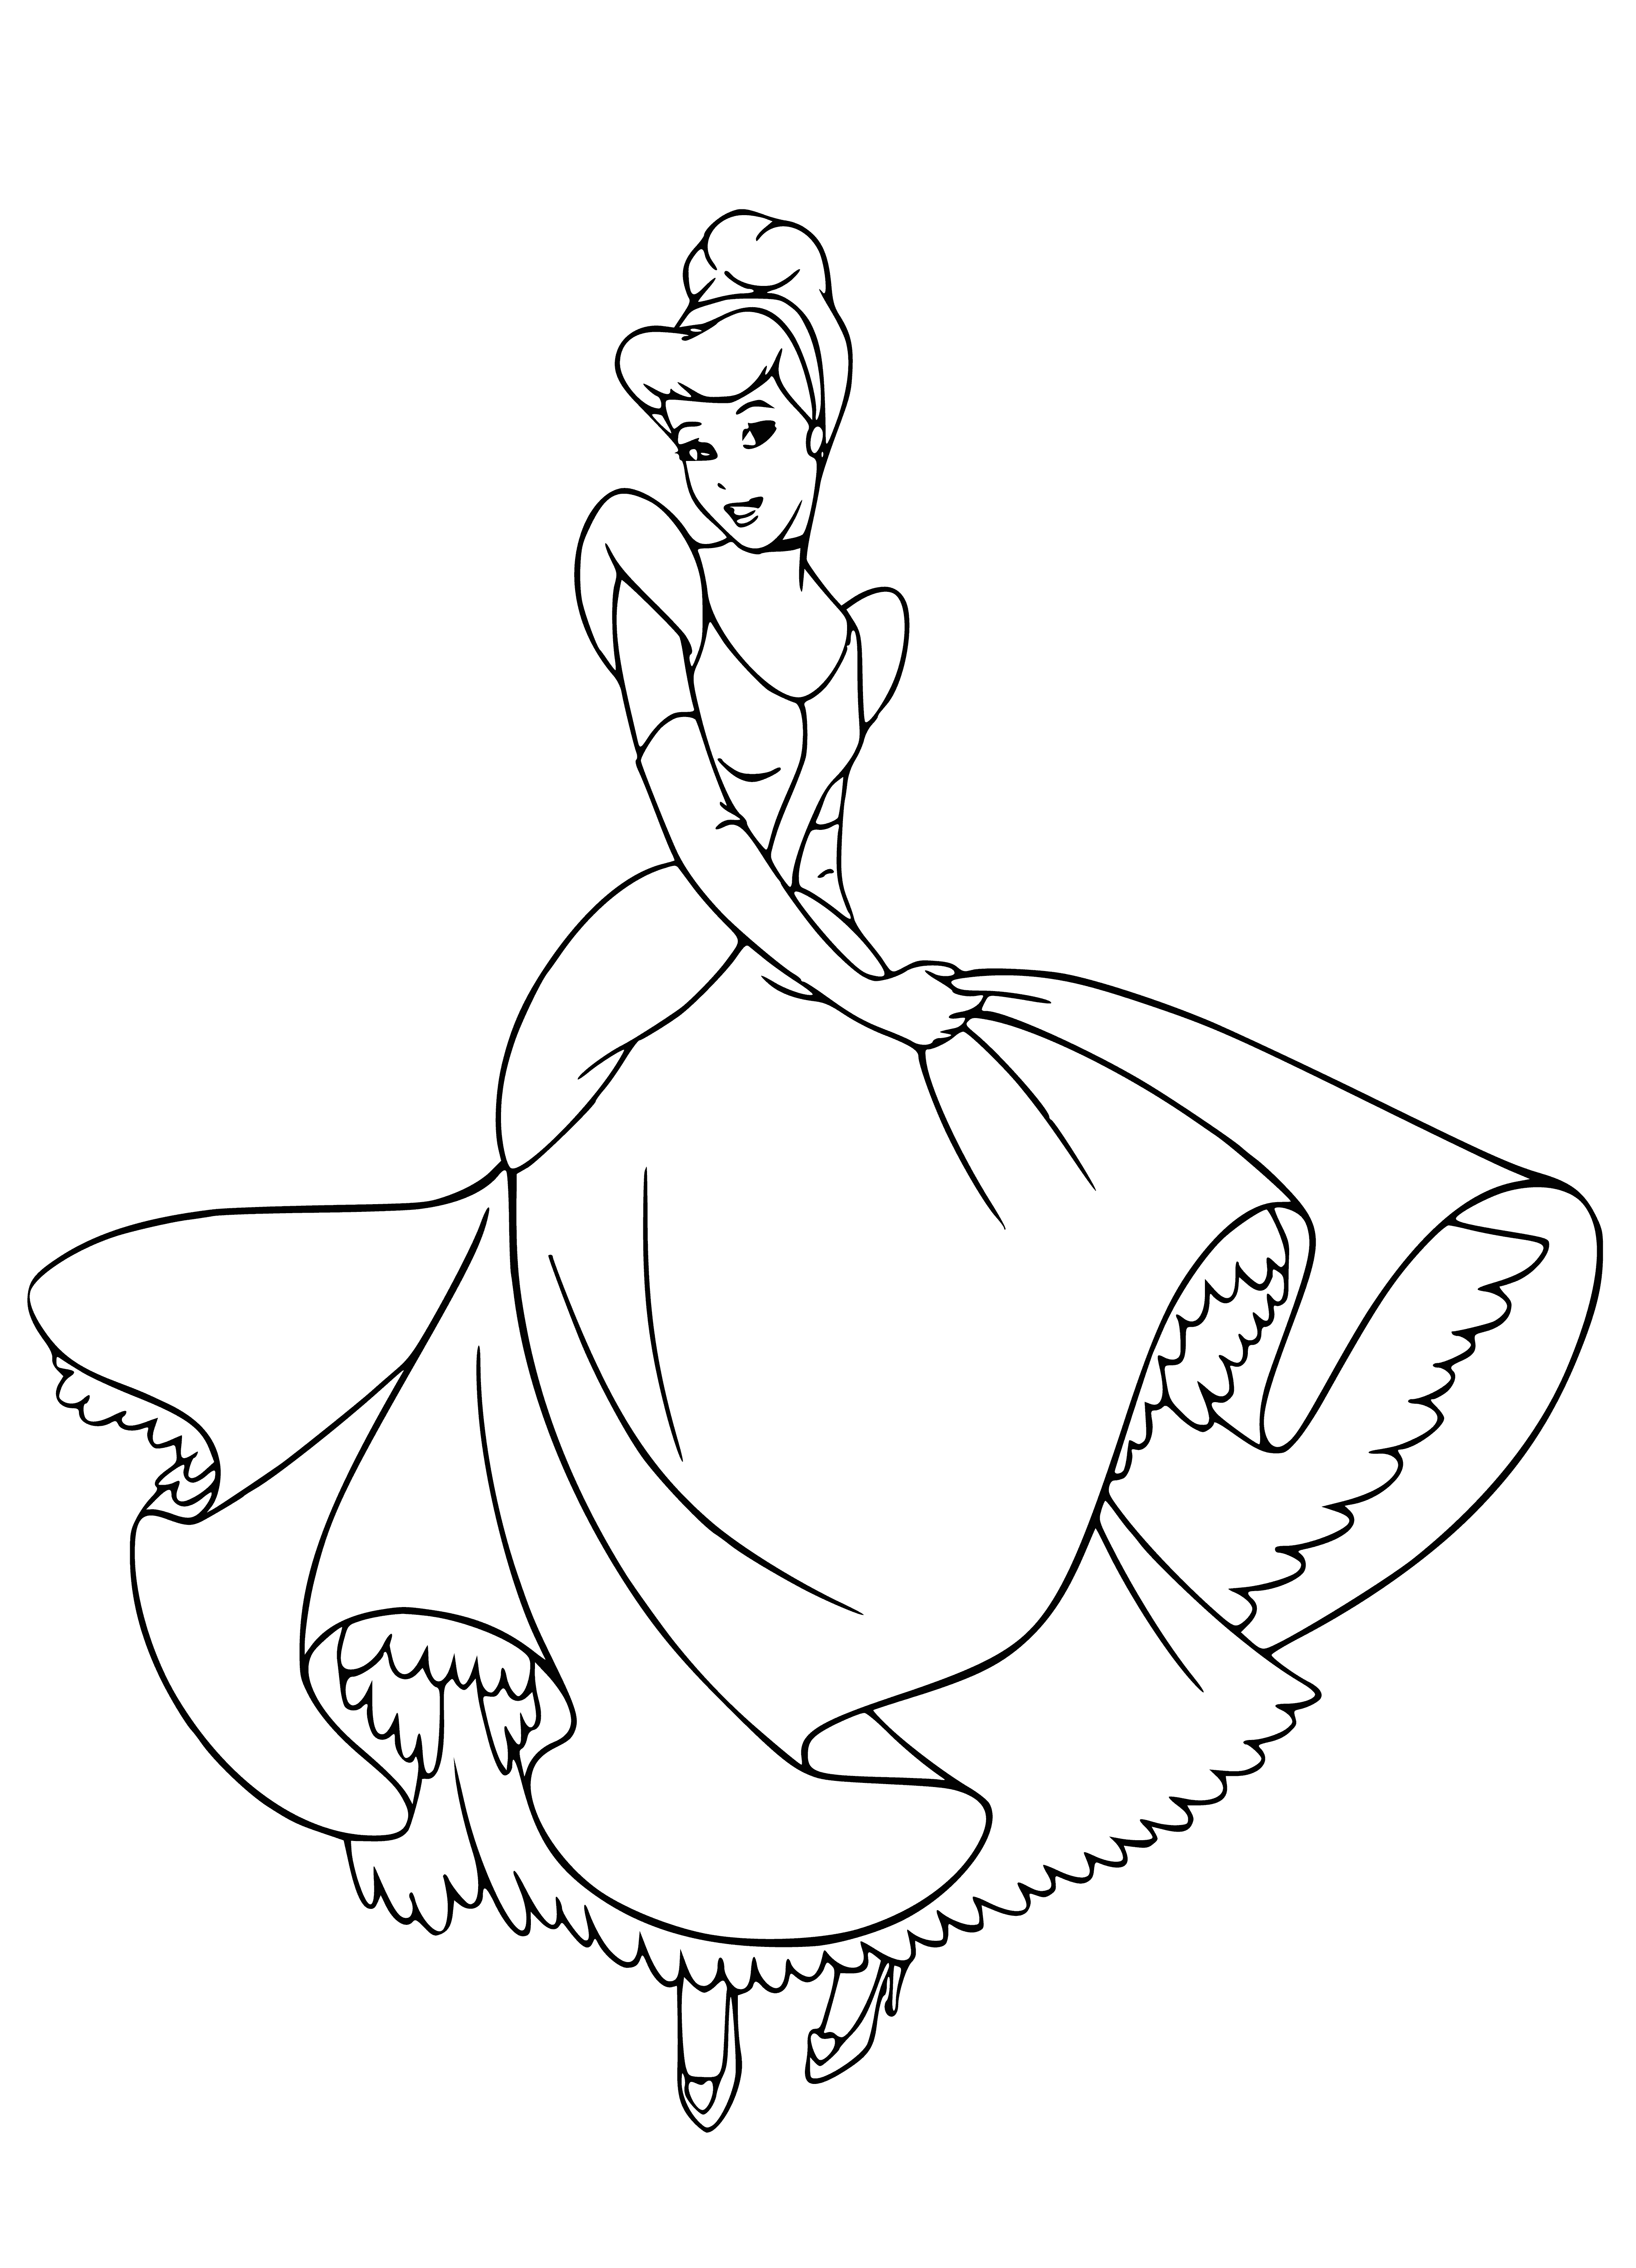 Cinderella in a ball gown coloring page